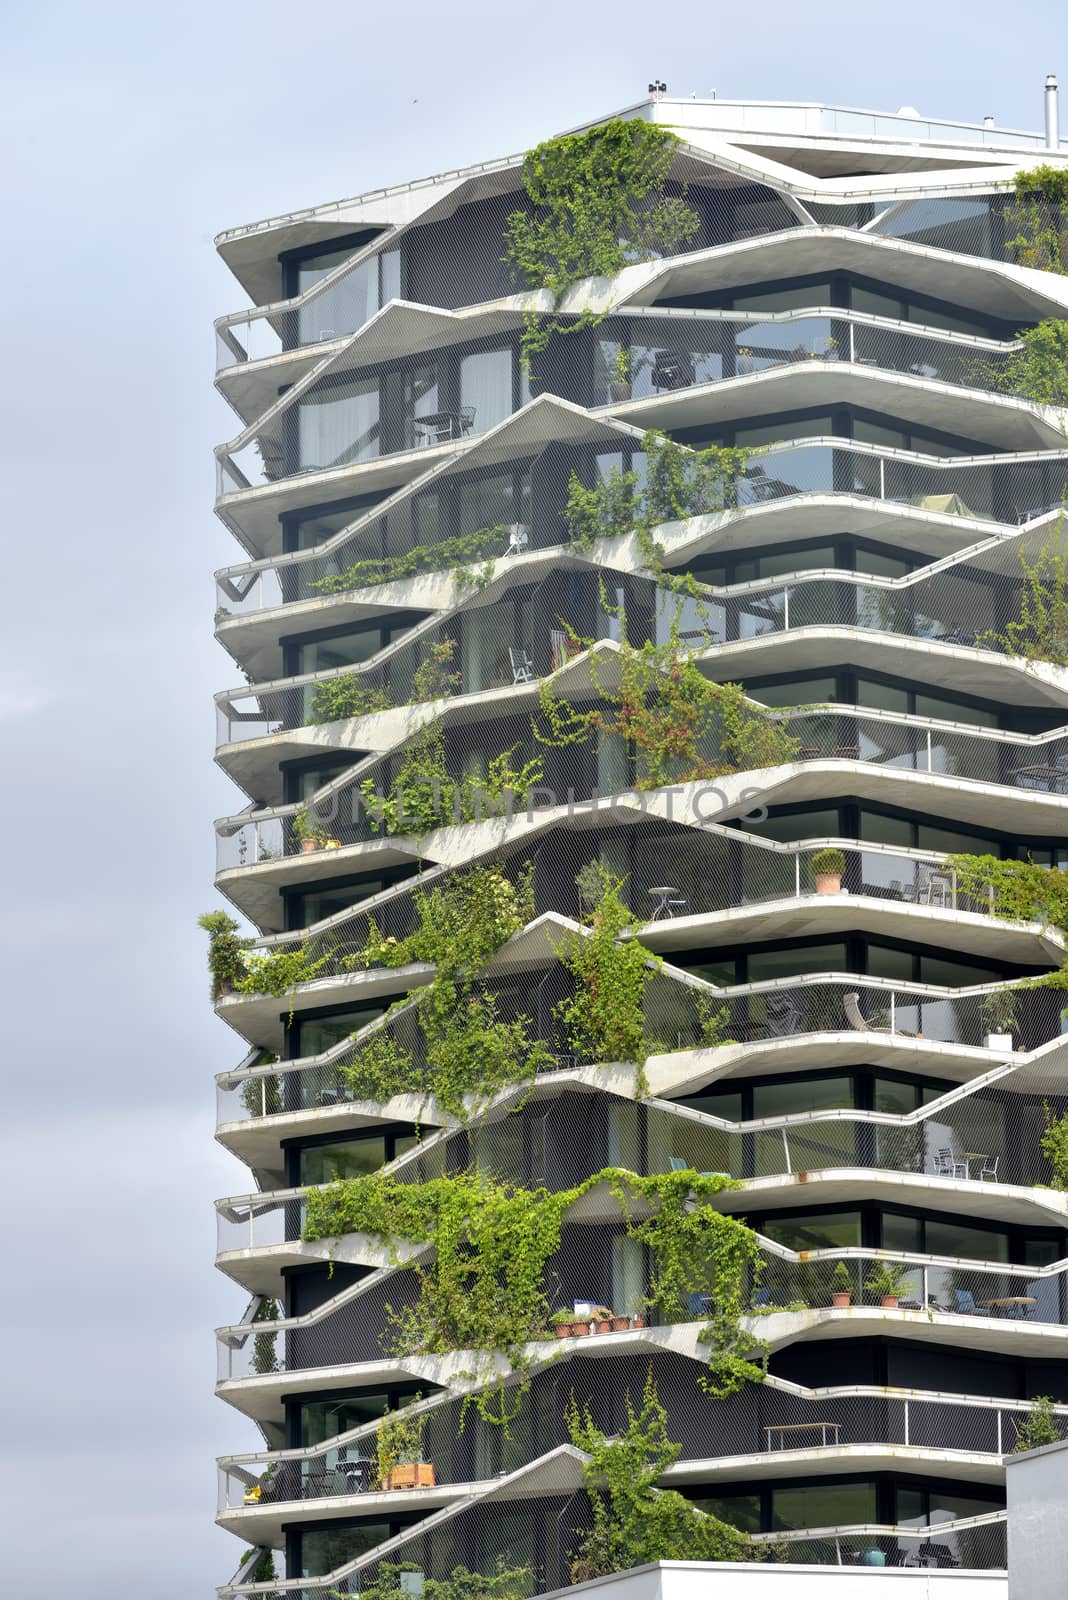 A green residential tower with climber plants -  Bern, Switzerland - 23 july 2017